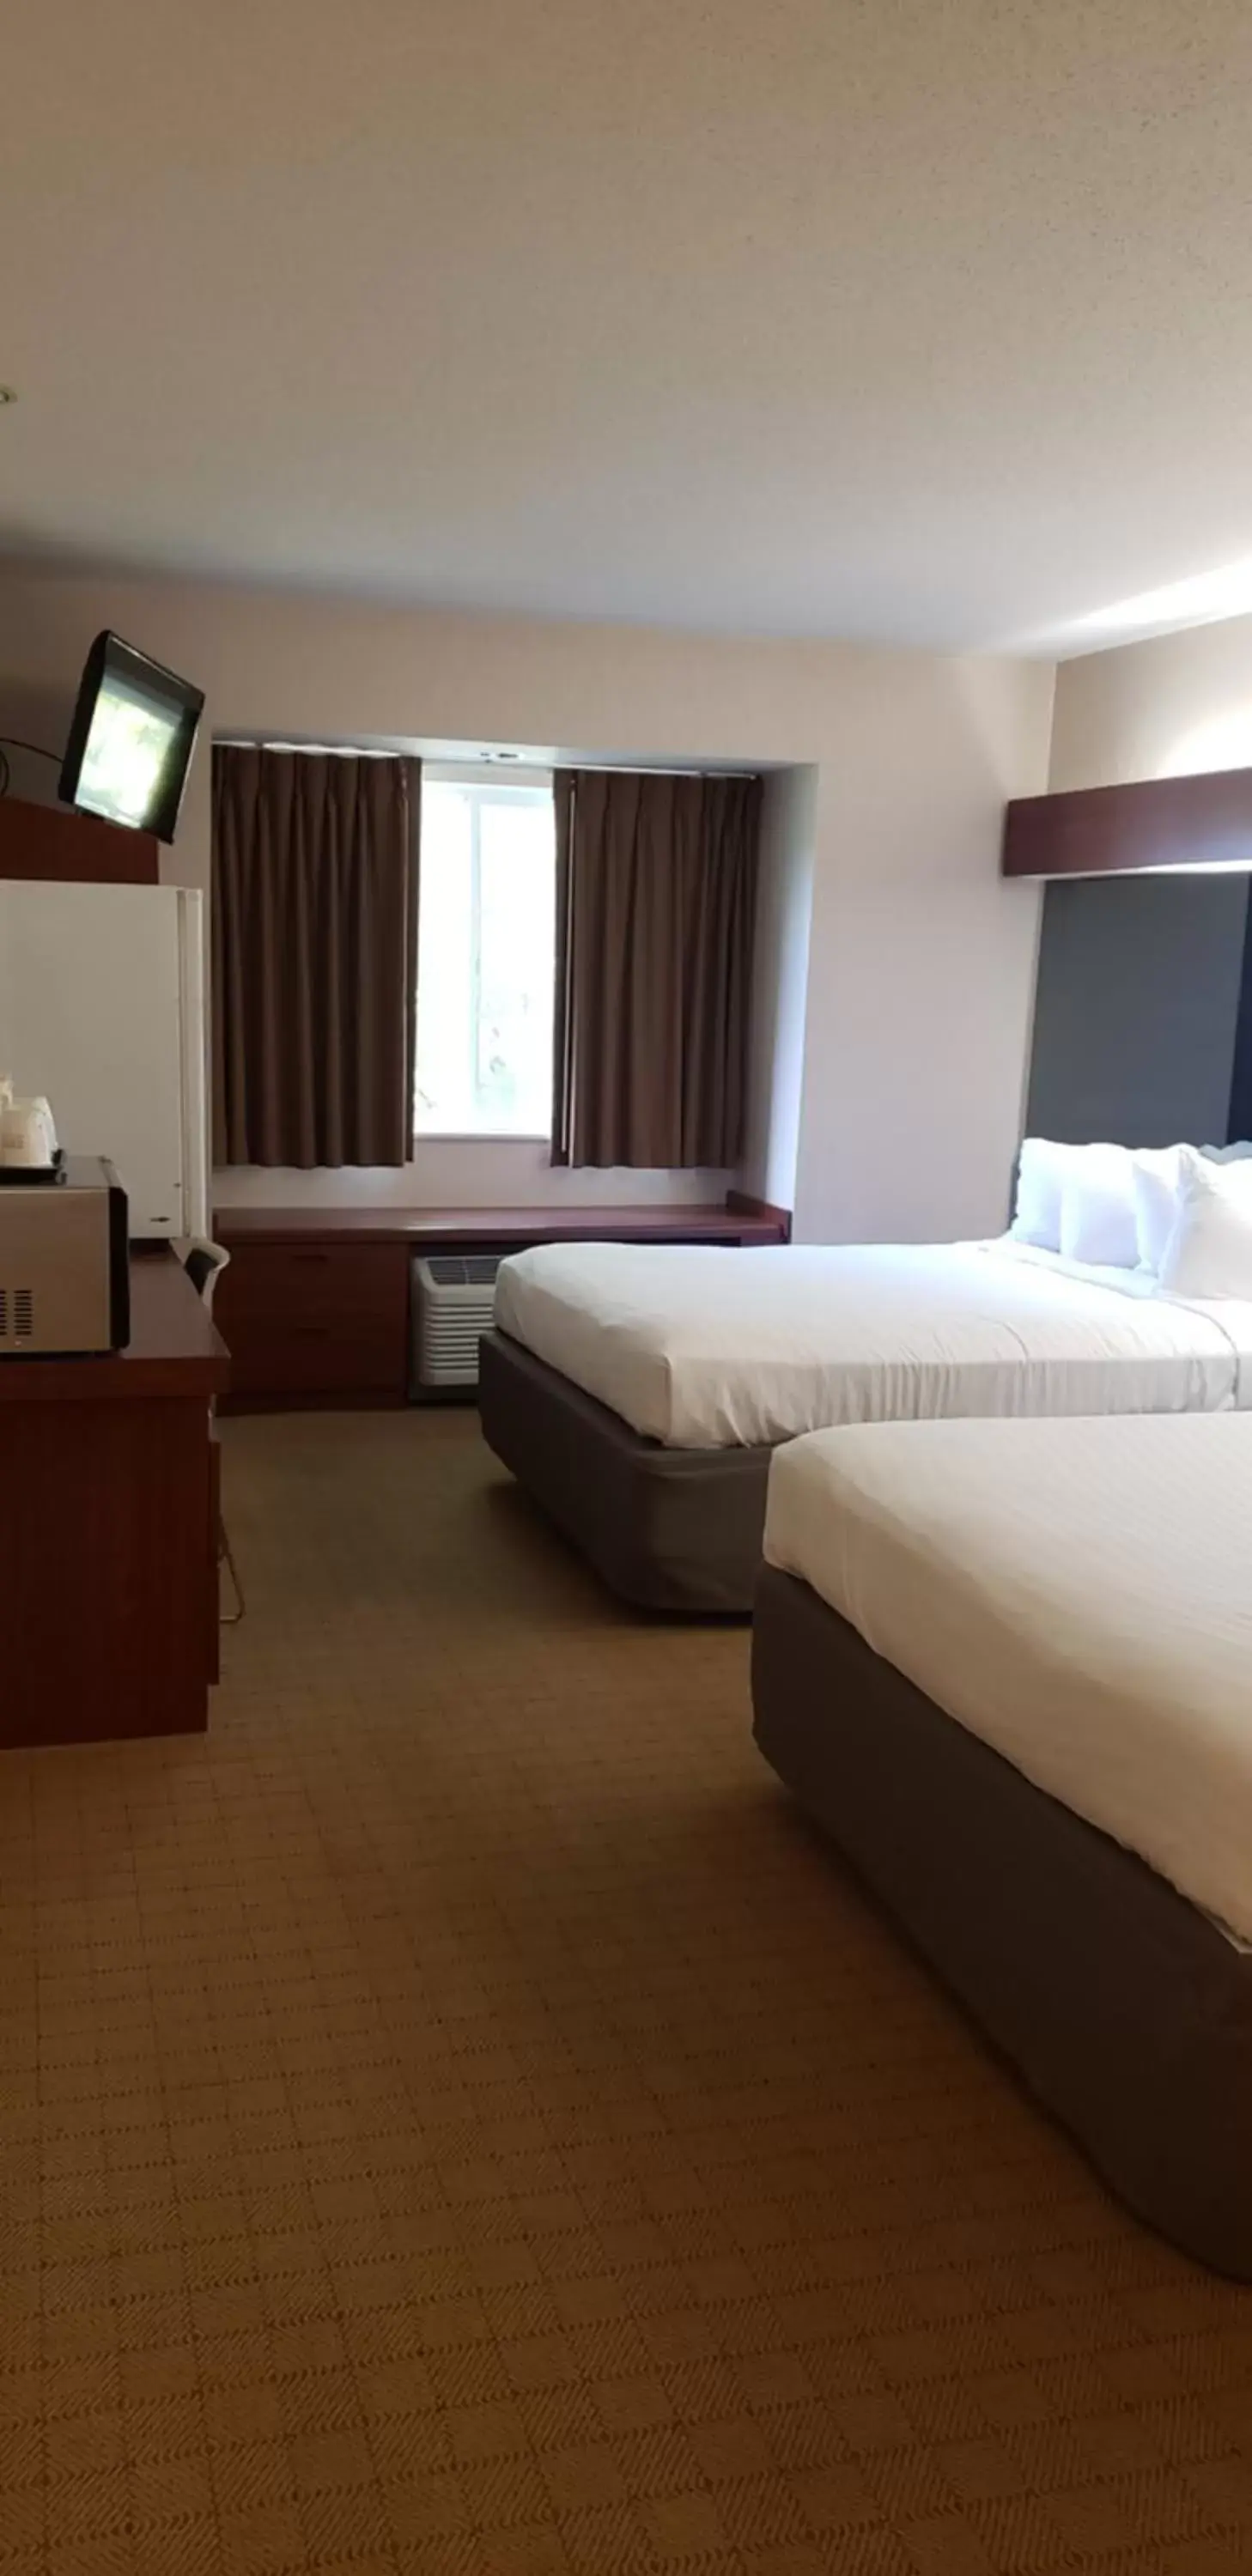 Room Photo in Microtel Inn & Suites by Wyndham Wellsville